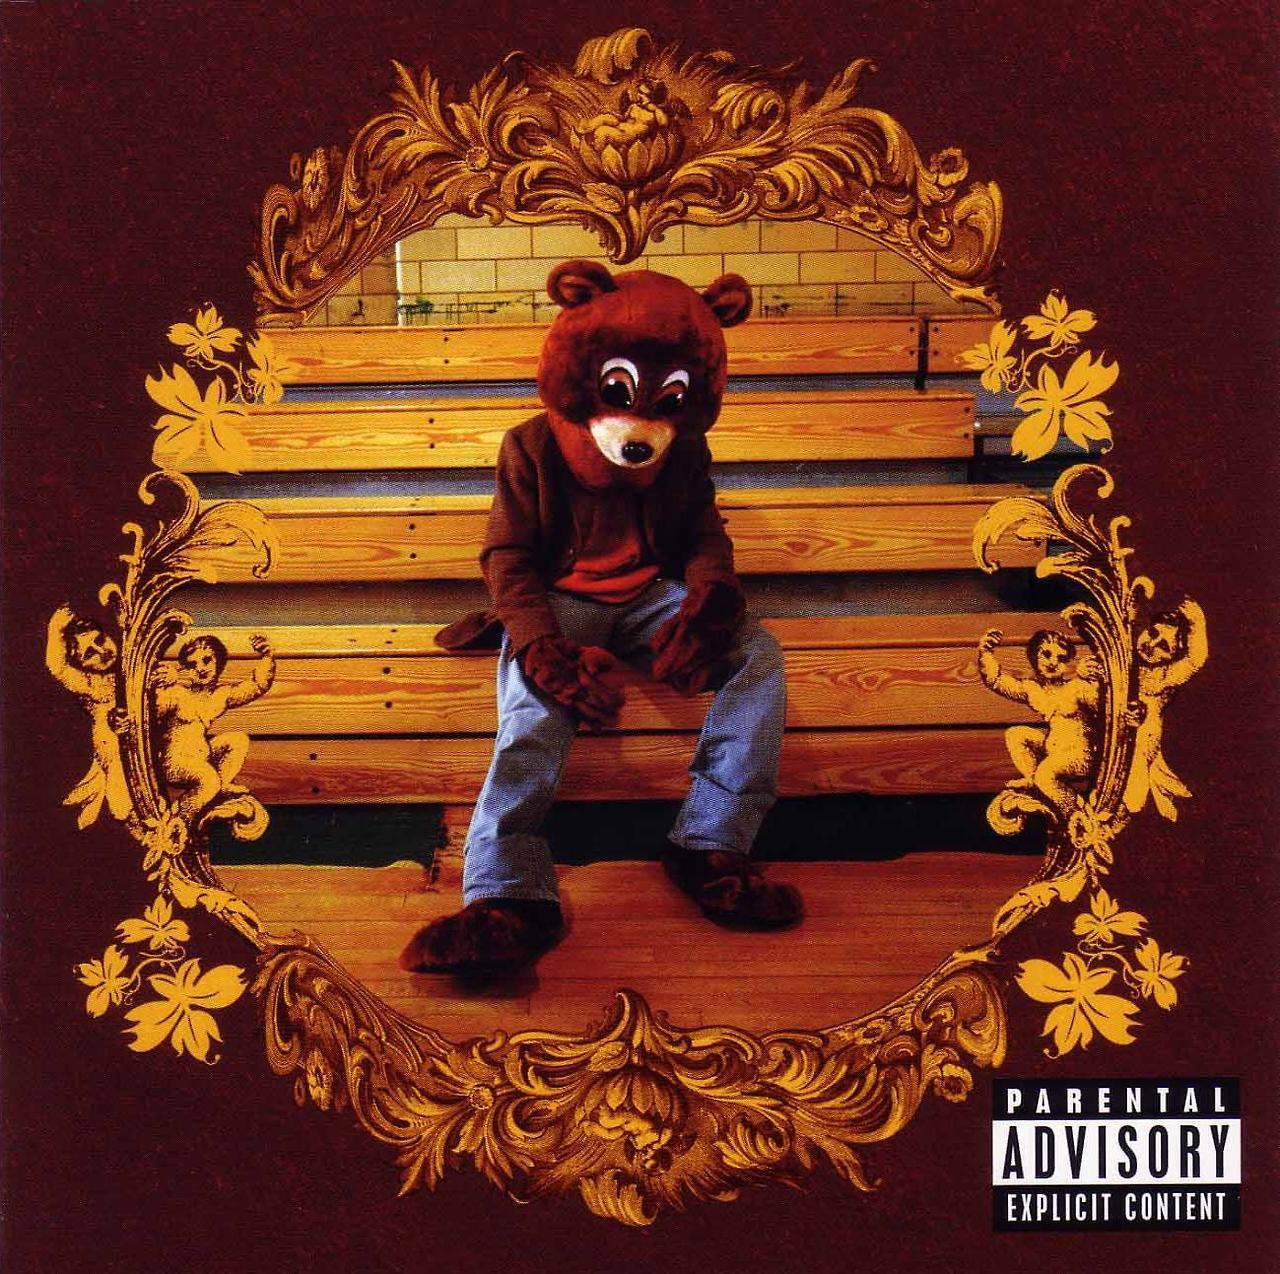 TEN YEARS AGO TODAY |2/10/04| Kanye West released his debut album, The College Dropout,